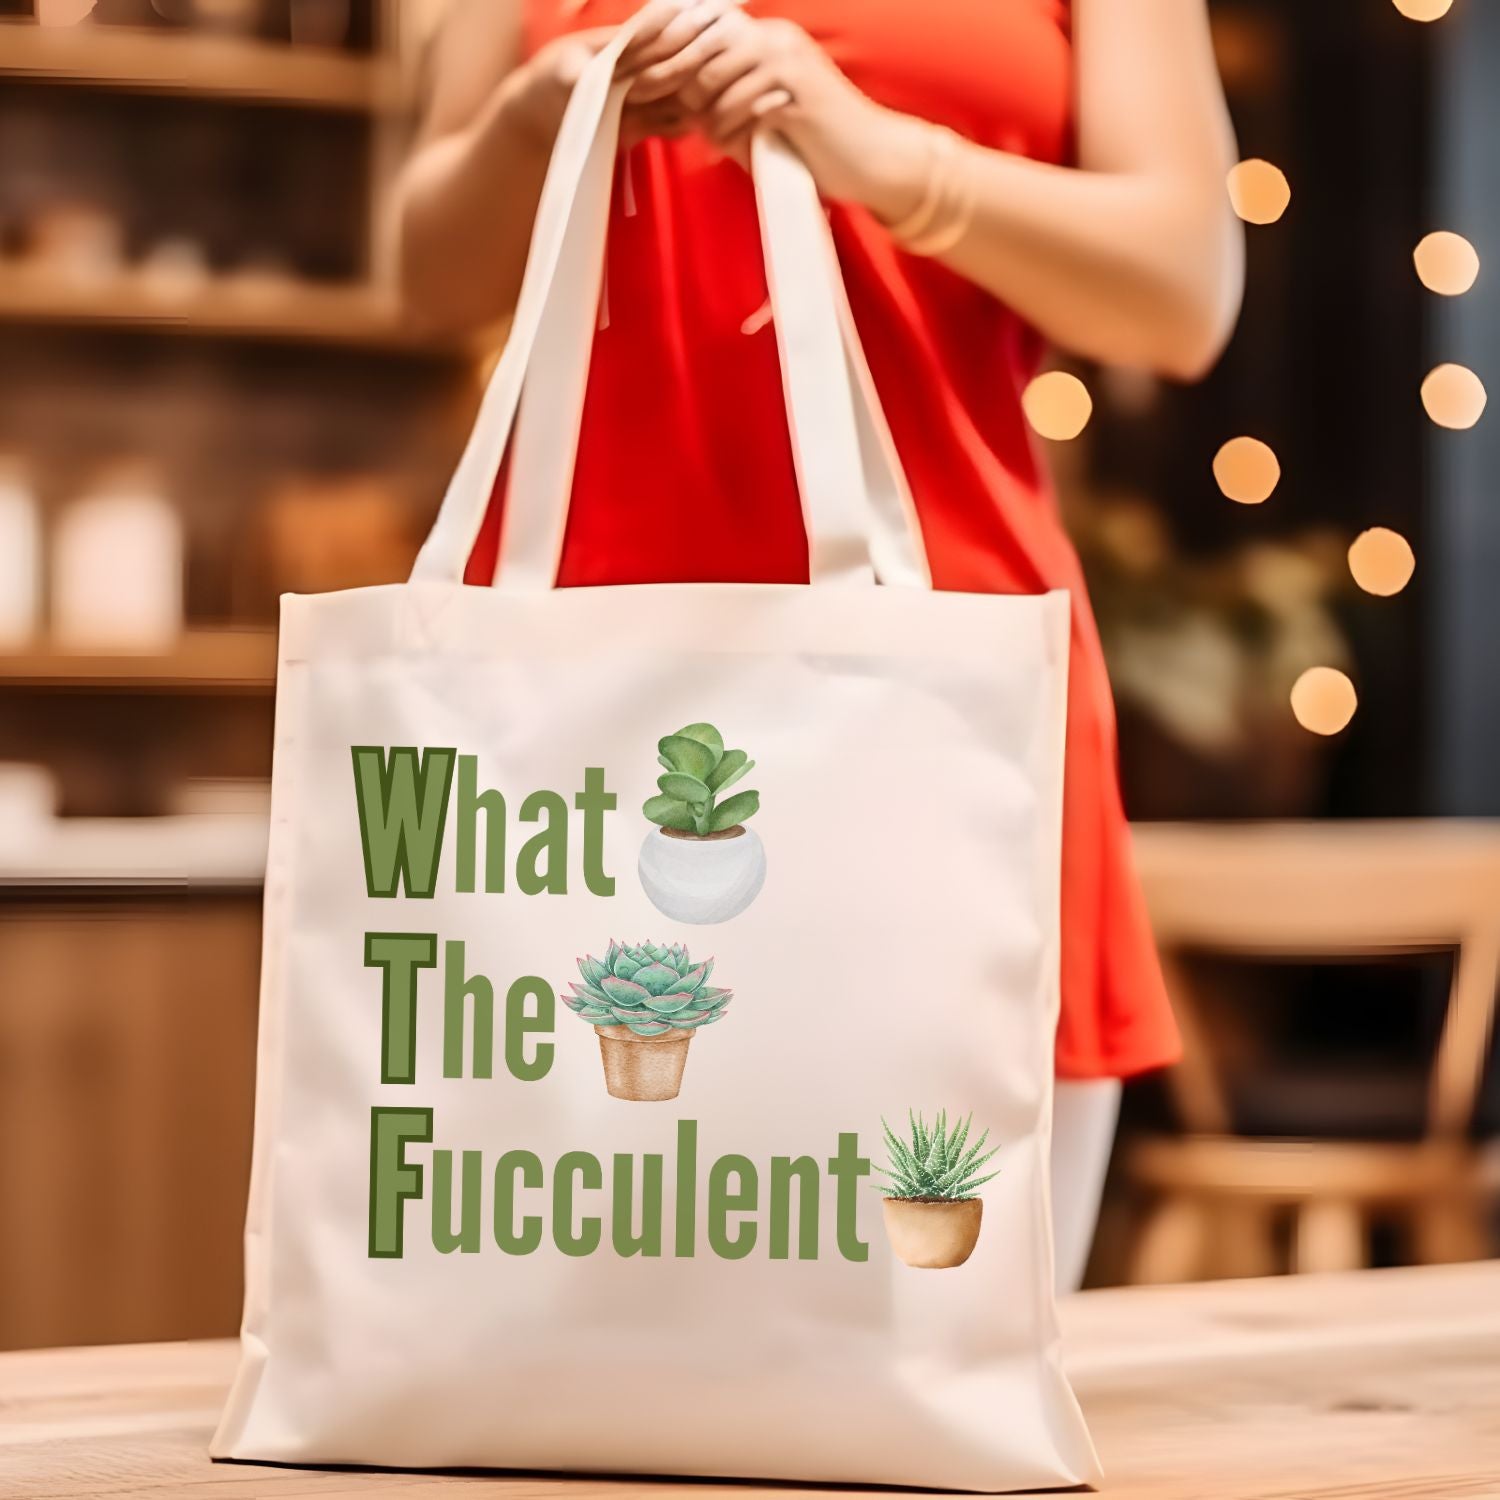 What The Fucculent Tote Bag - Humorous Plant Lover's Carryall Bags   